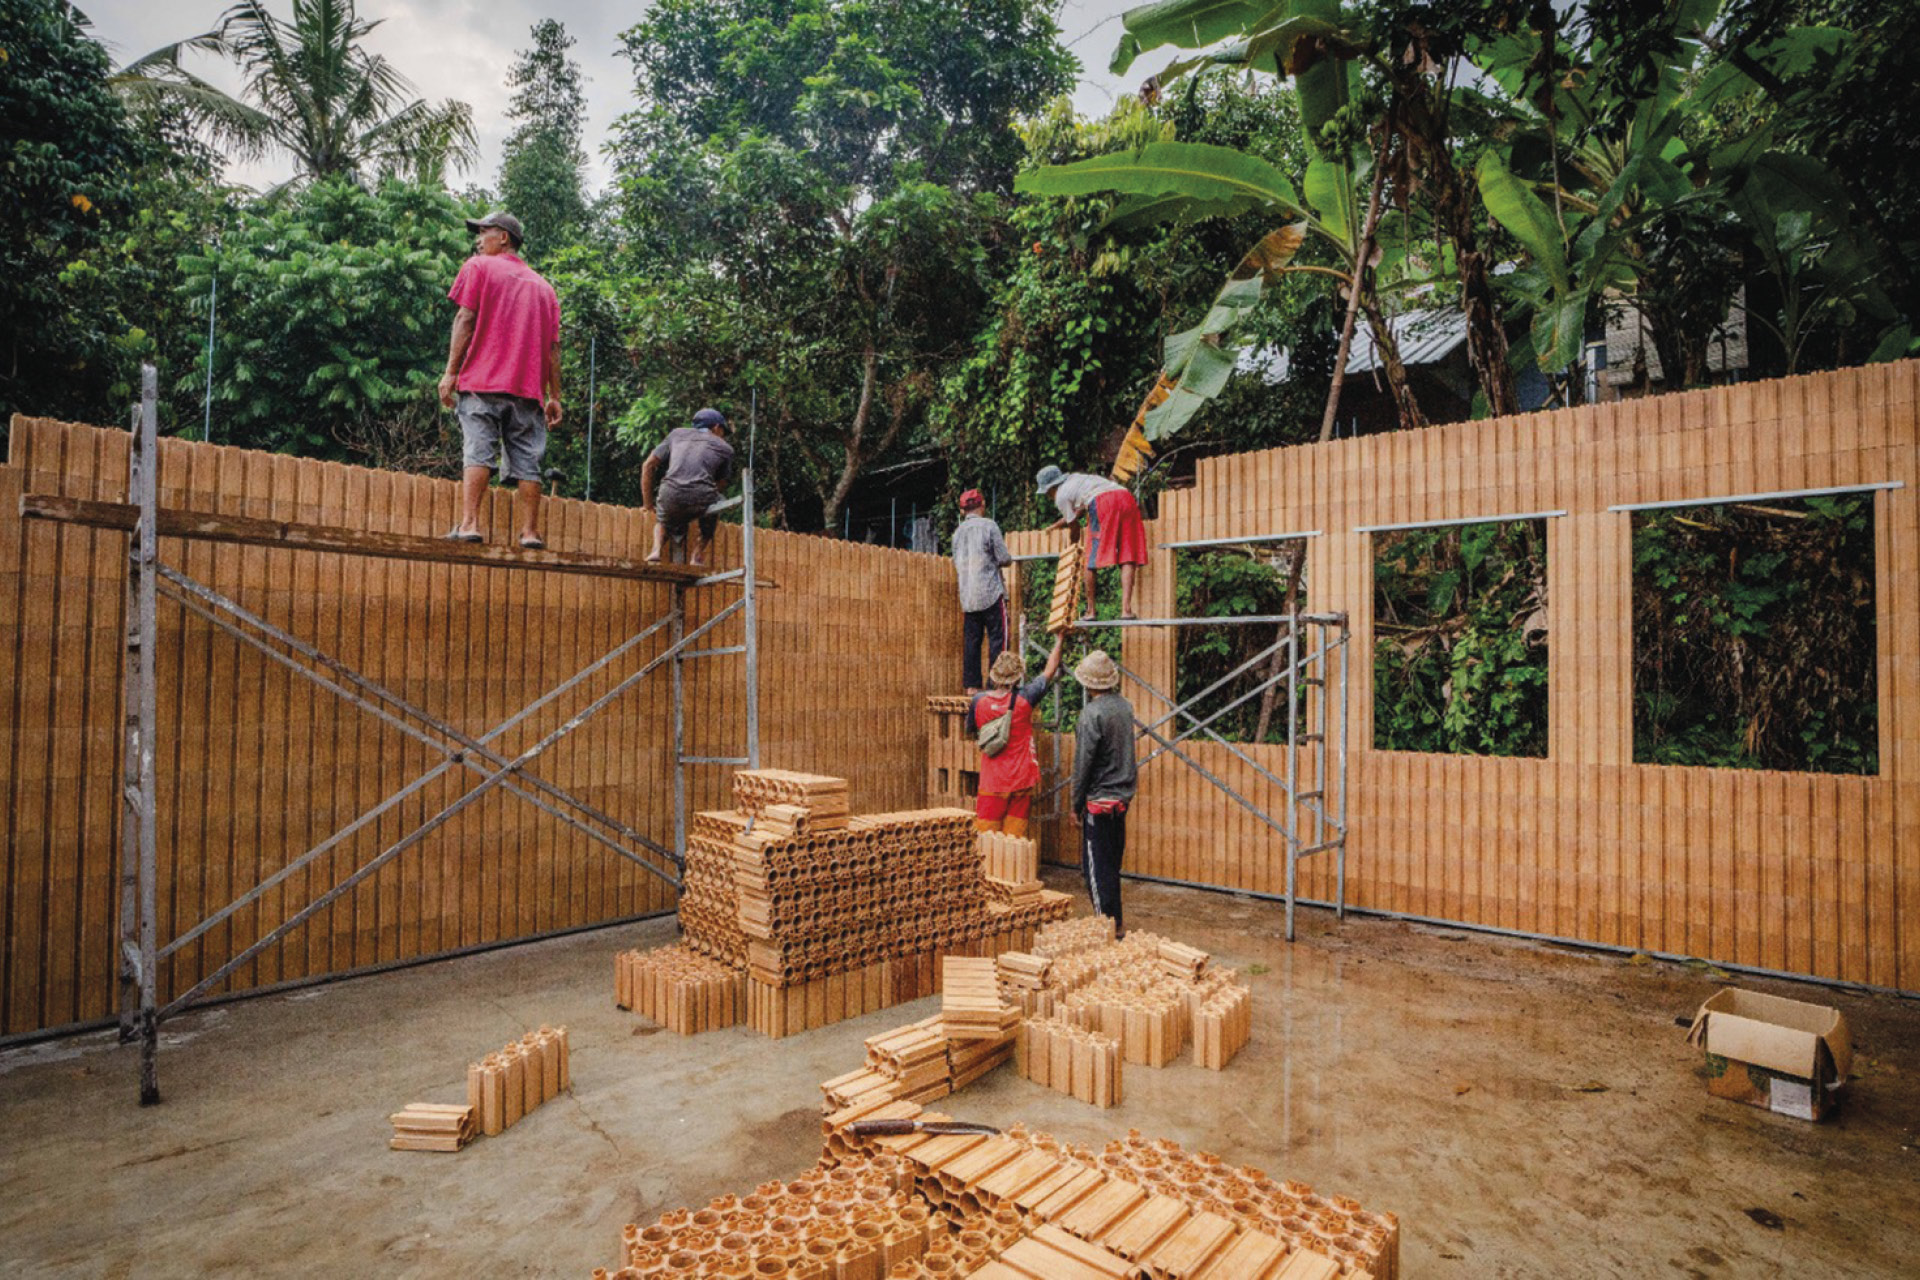 Building hope out of recycled plastic